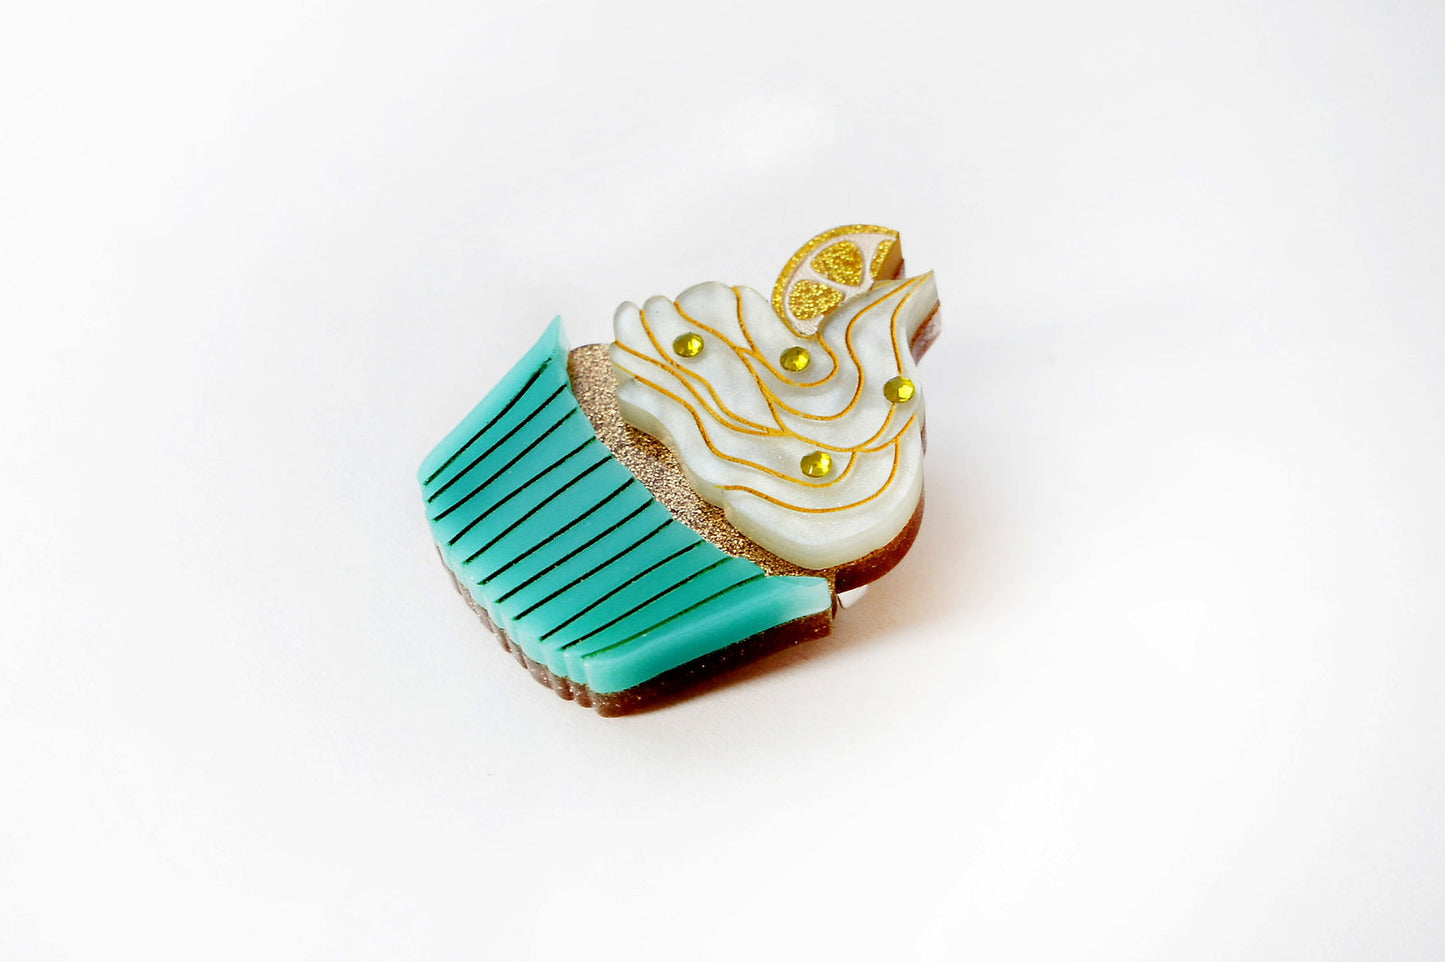 Lemon Drizzle Muffin Brooch by LaliBlue